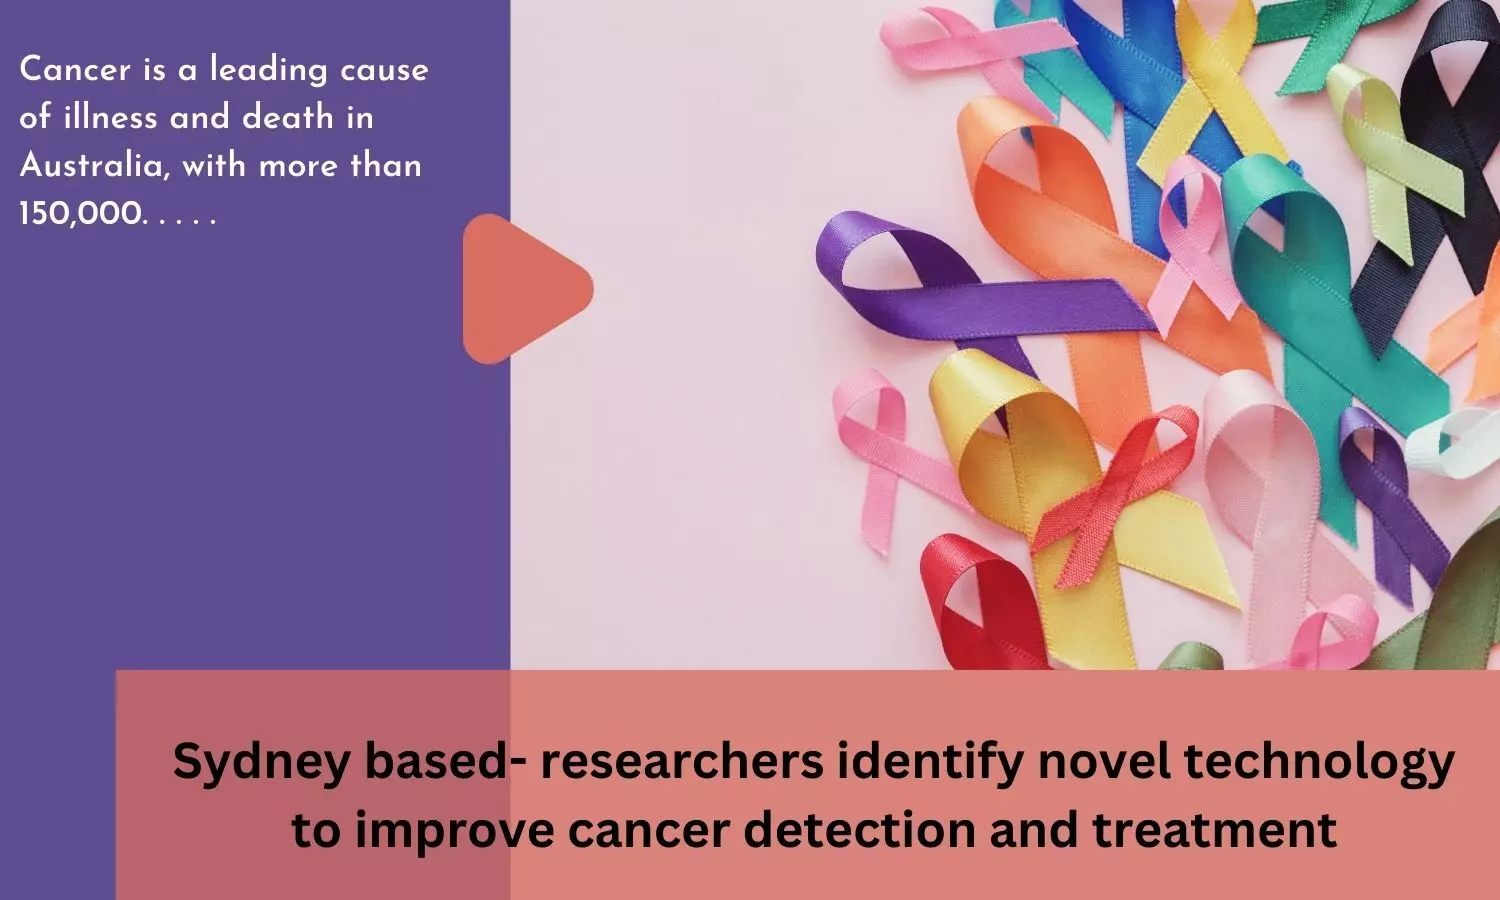 Sydney based- researchers identify novel technology to improve cancer detection and treatment